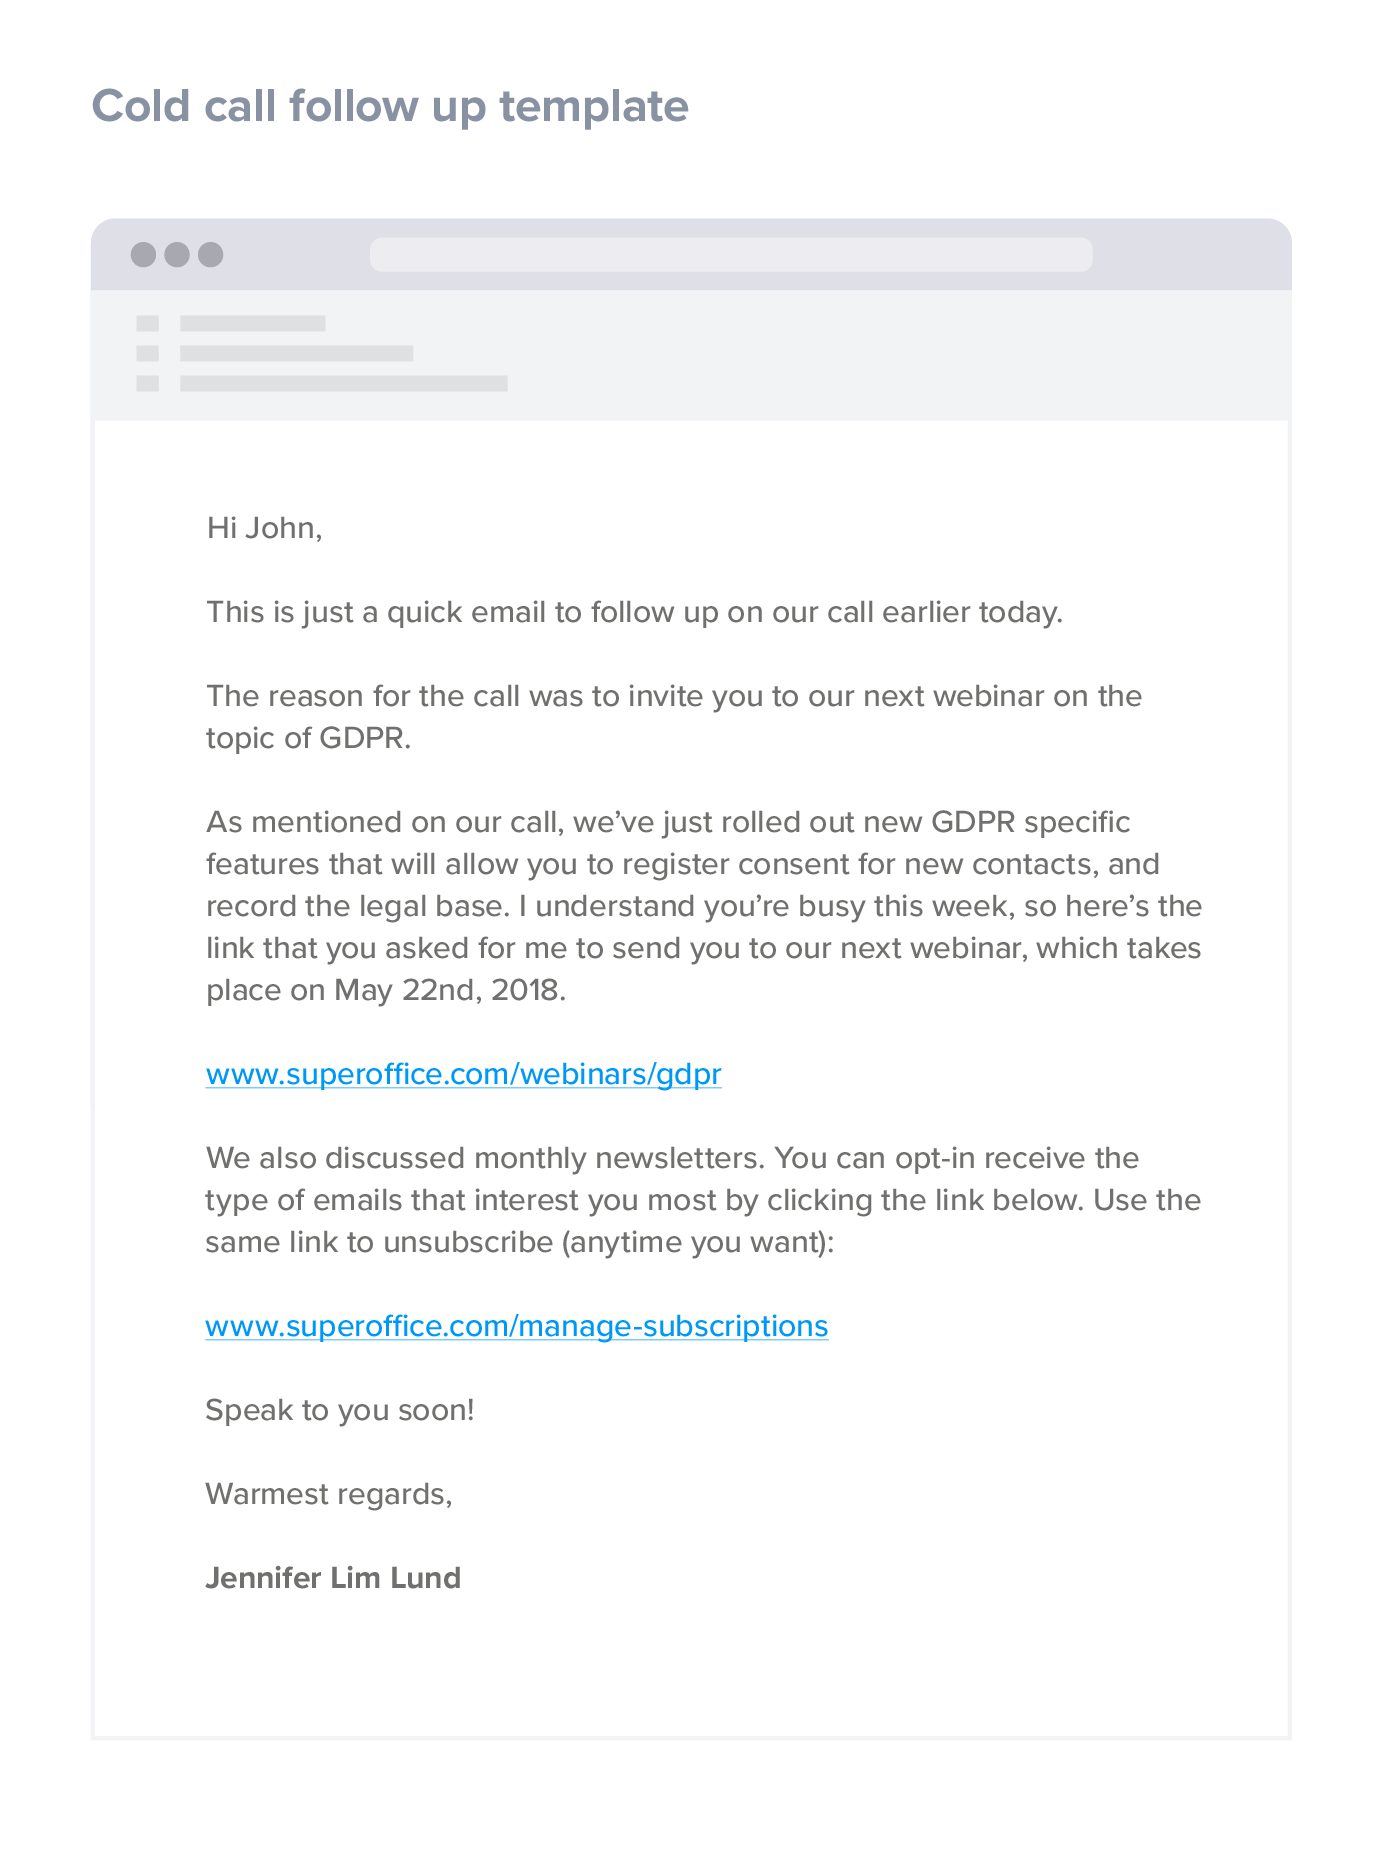 Cold call follow up email template